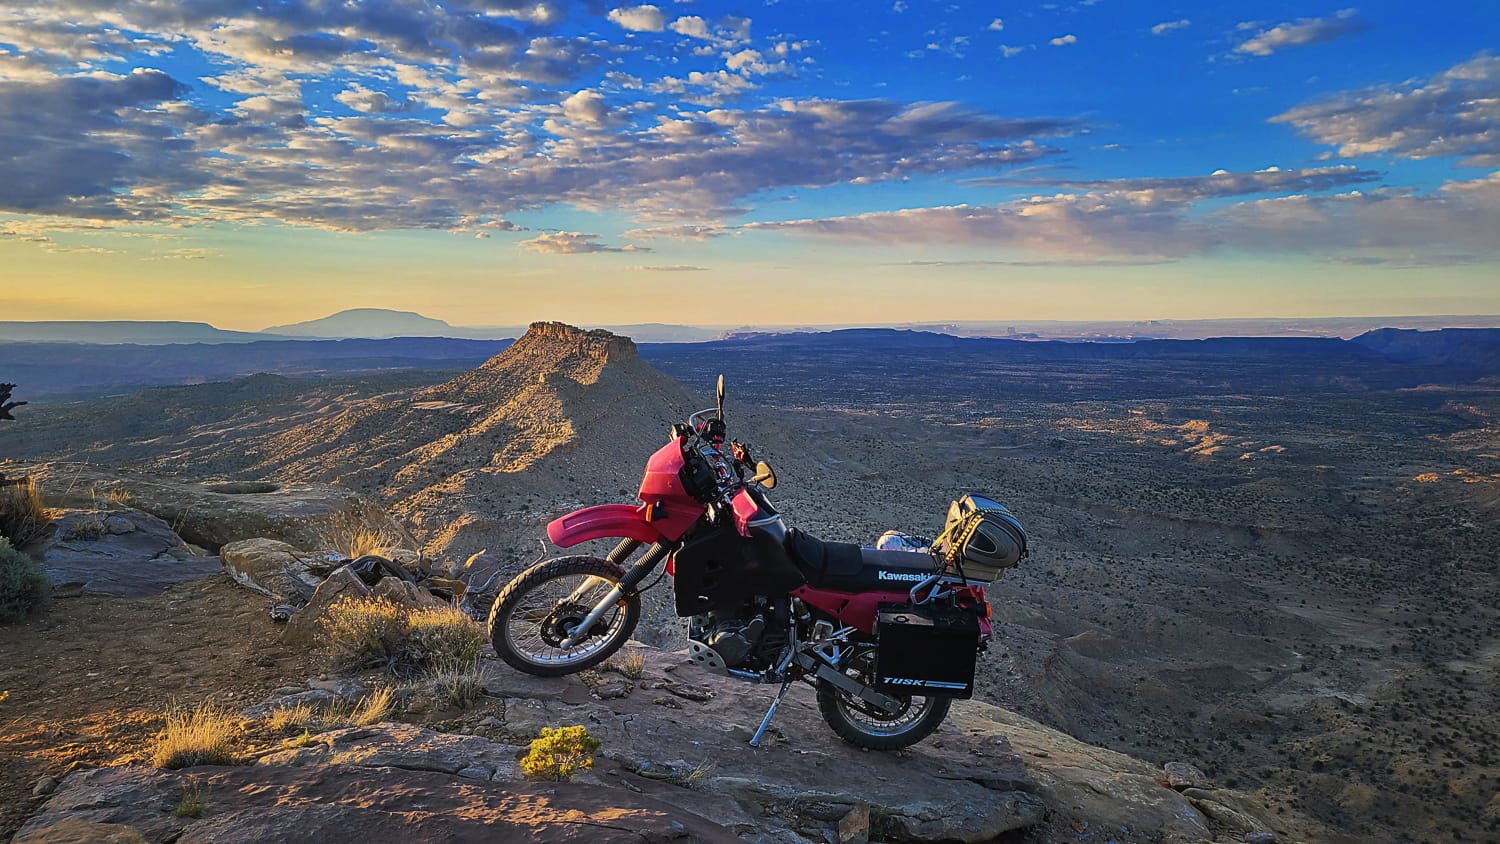 Motorcycle parked at the edge of a mesa with desert valley behind